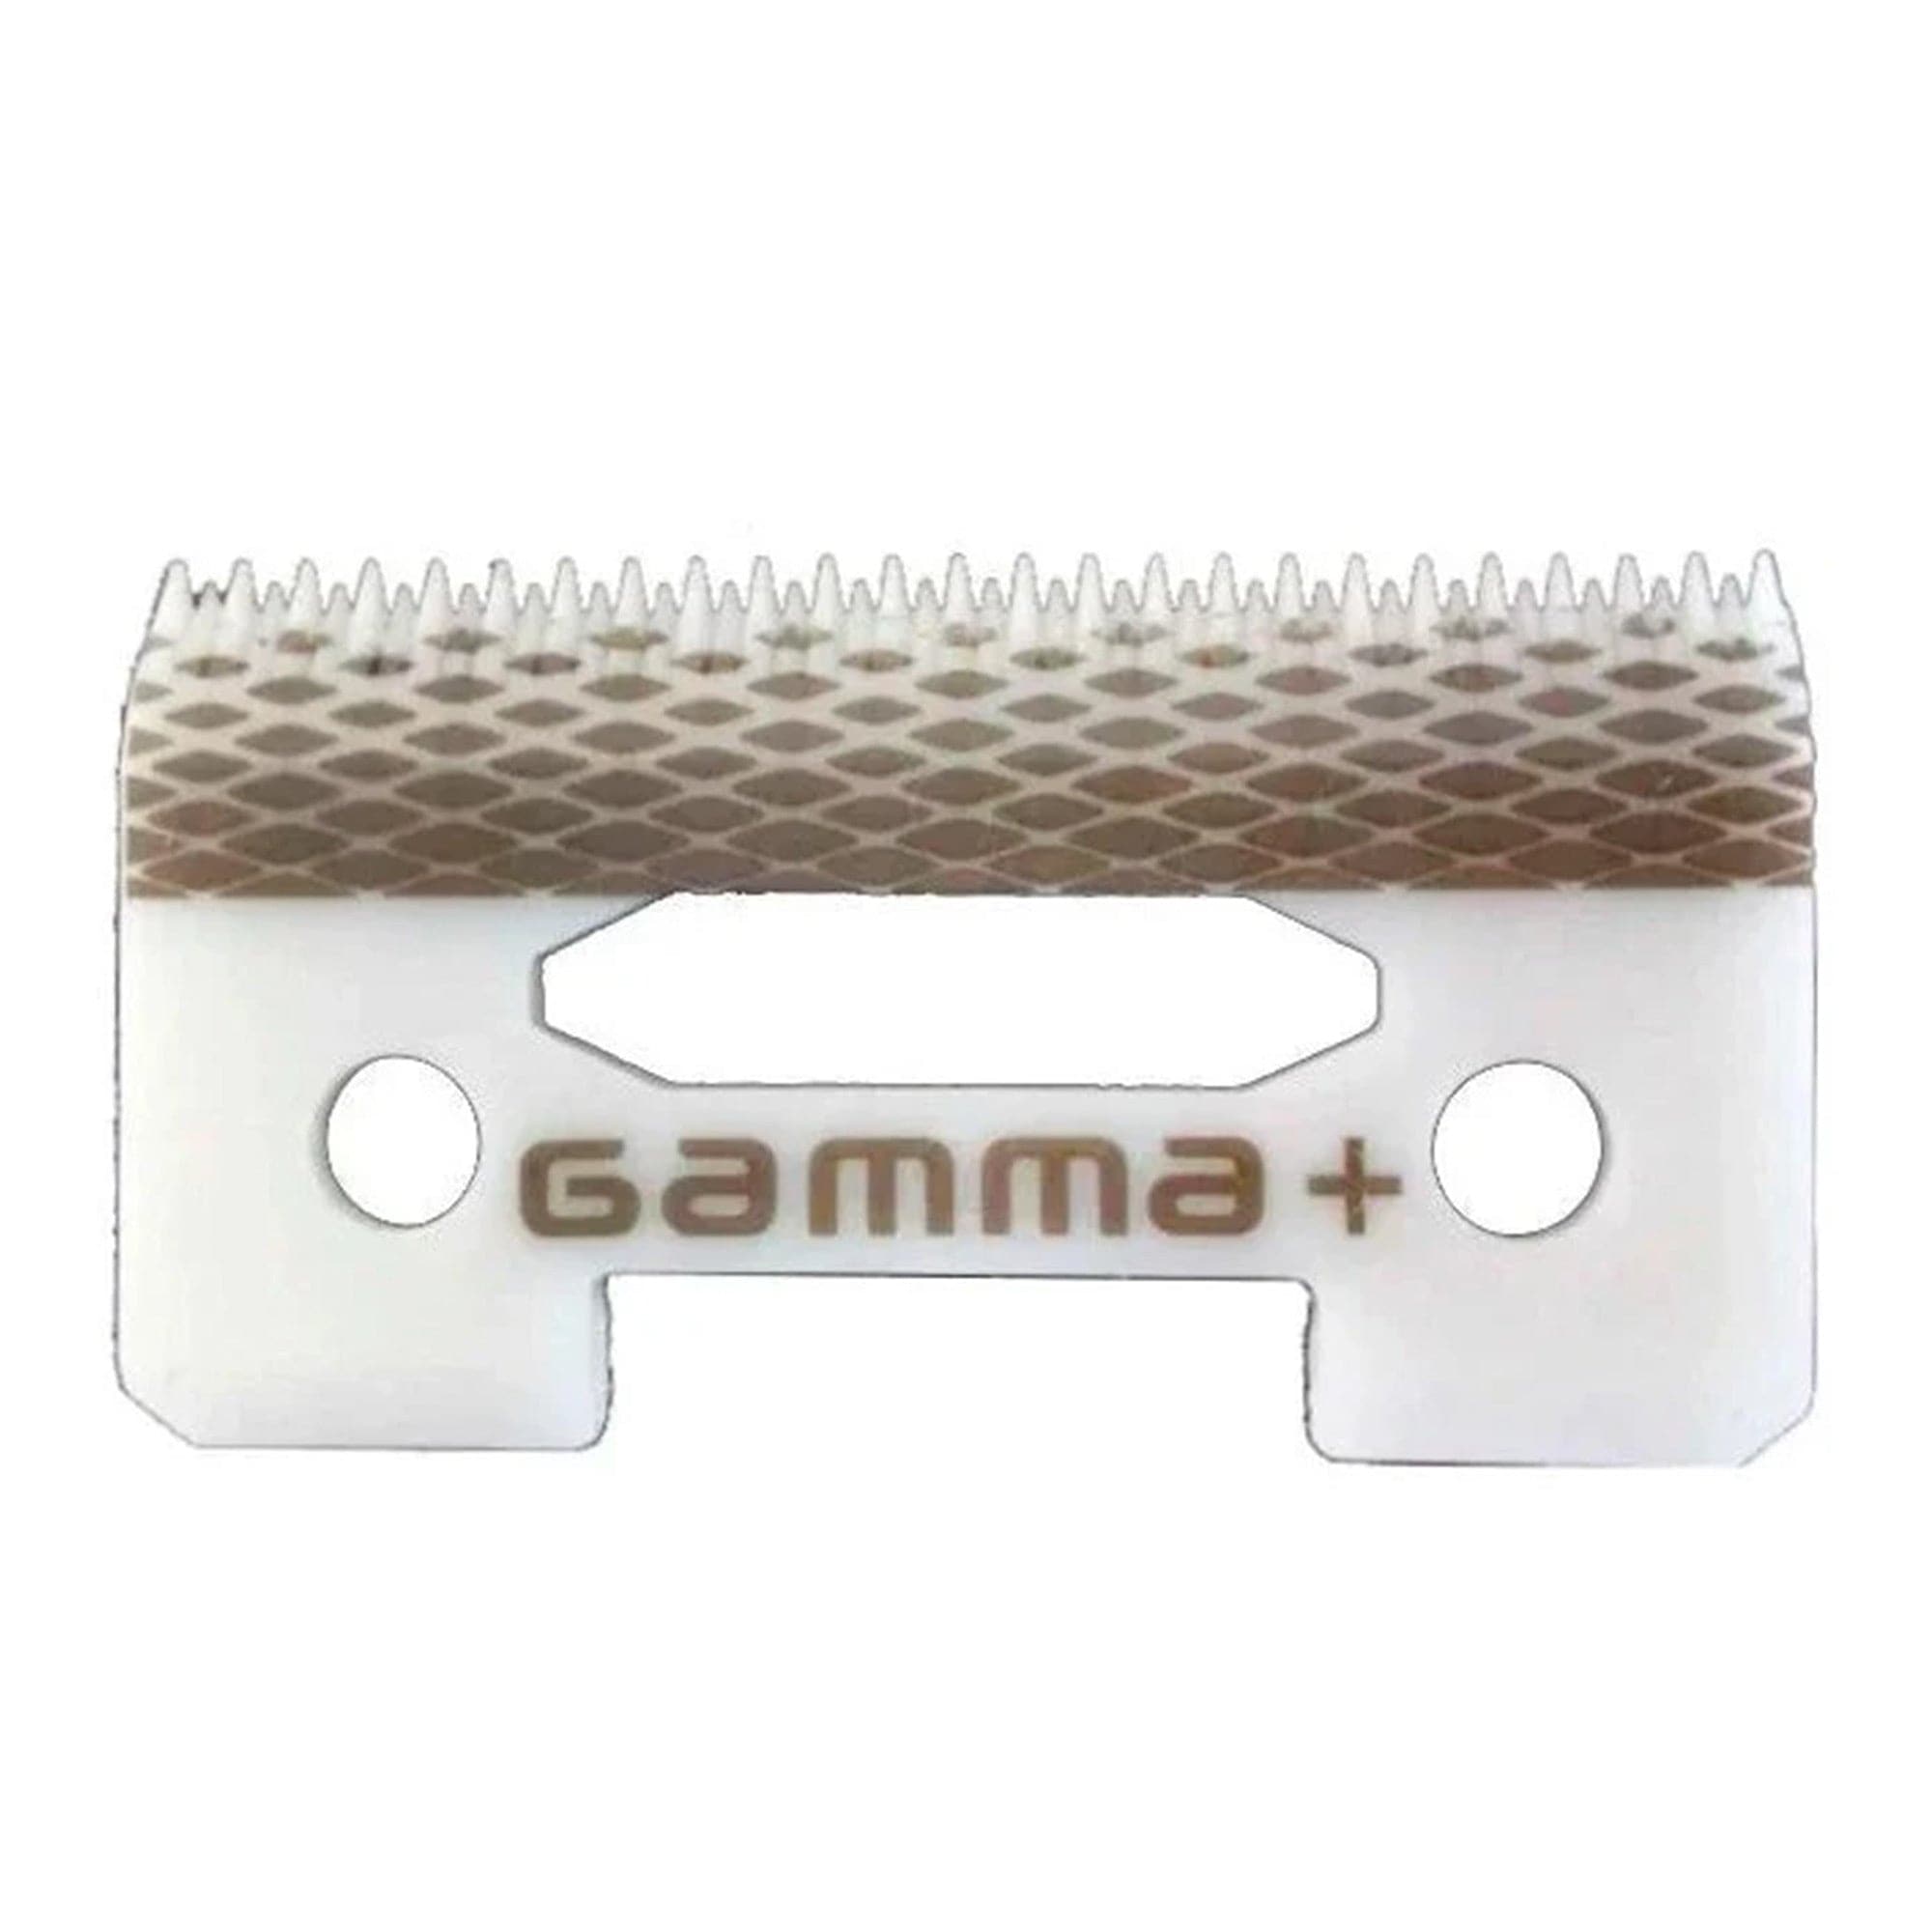 Gamma+ - Staggered Tooth Ceramic Blade For Clipper